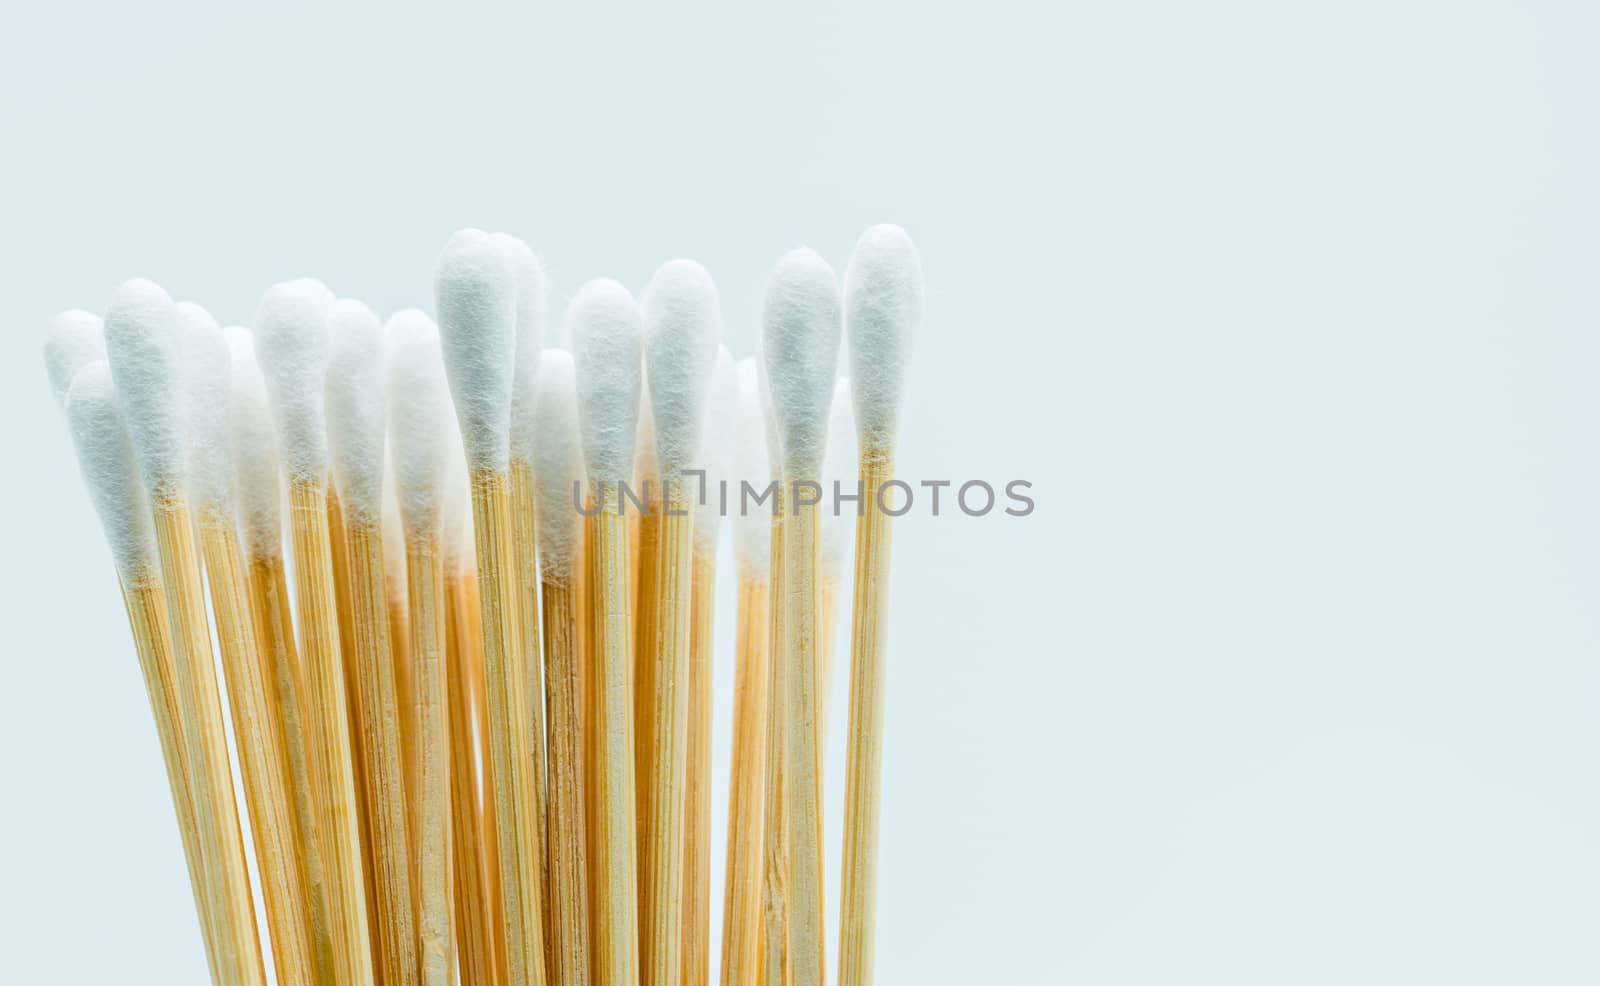 Cotton sticks isolated on white background with copy space for text. Medical equipment. Wound care supply.